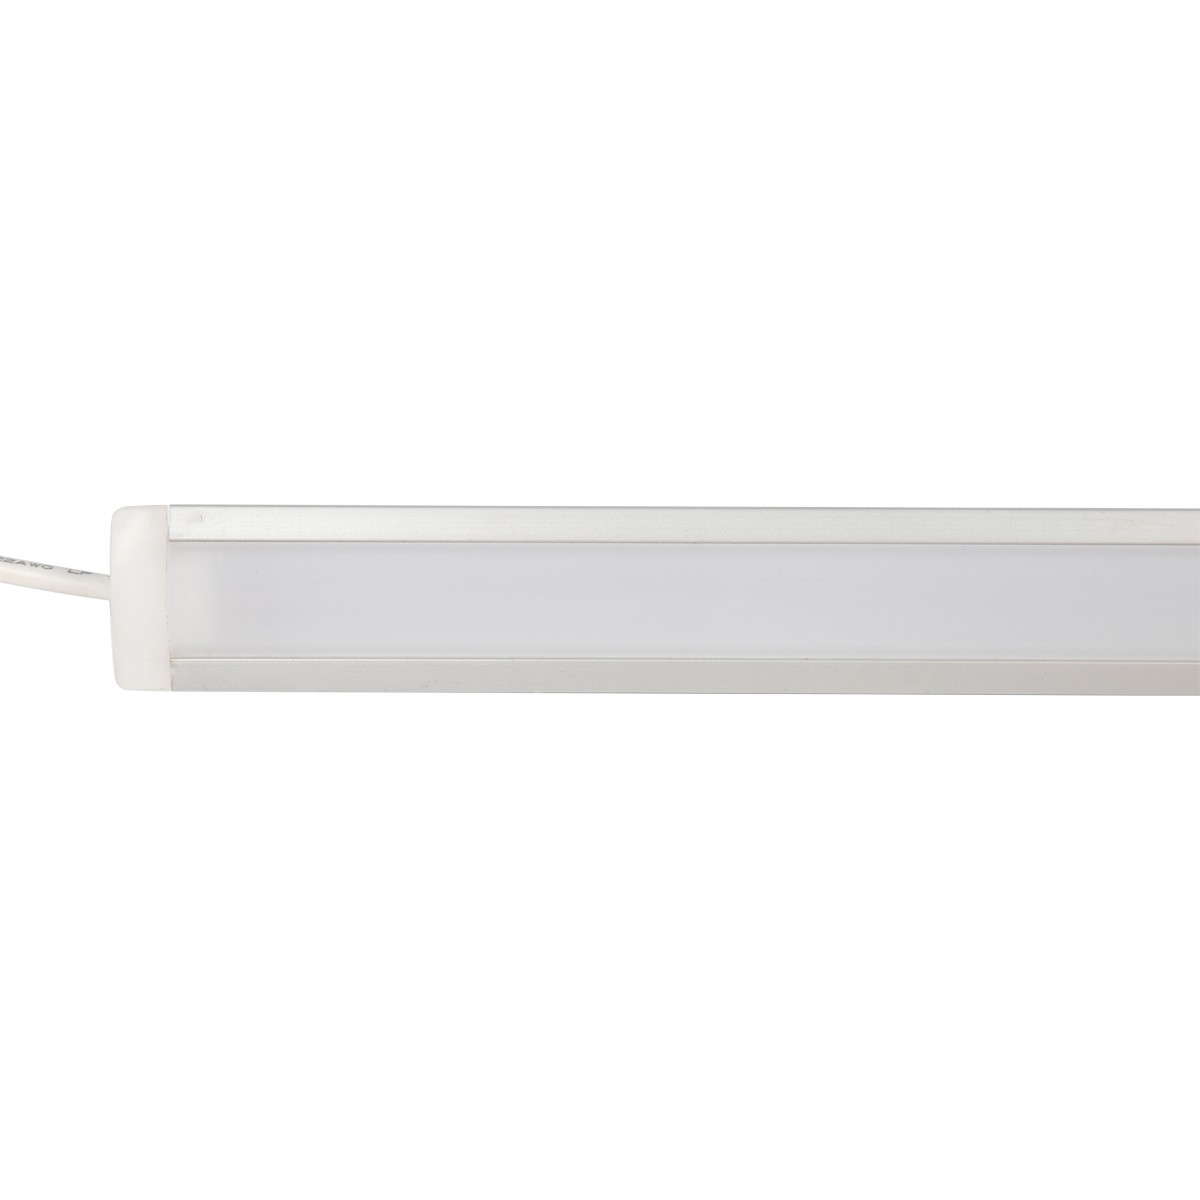 Built-in led linear lamp 5050 for hotel wardrobe with indoor and outdoor decoration led hard light b